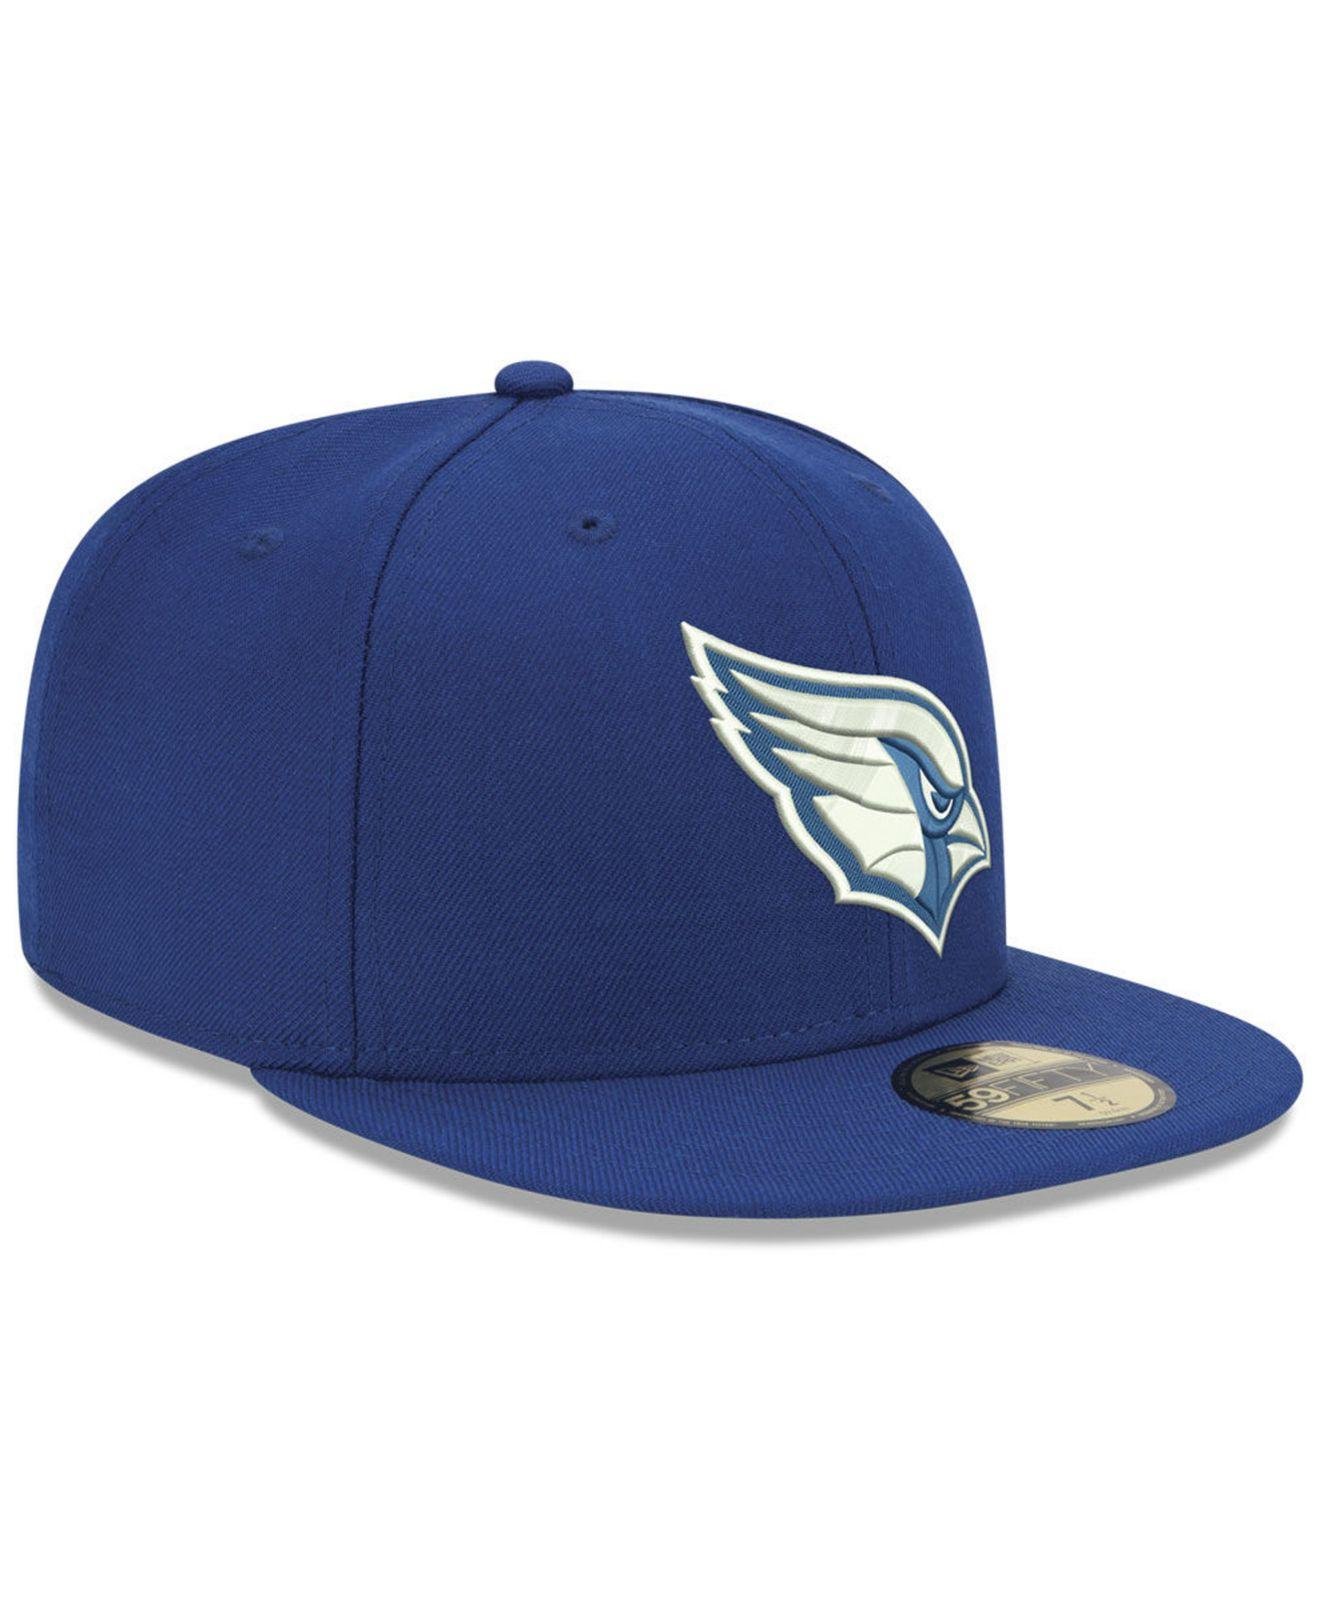 KTZ Arizona Cardinals Basic Fashion 59fifty-fitted Cap in Blue for 